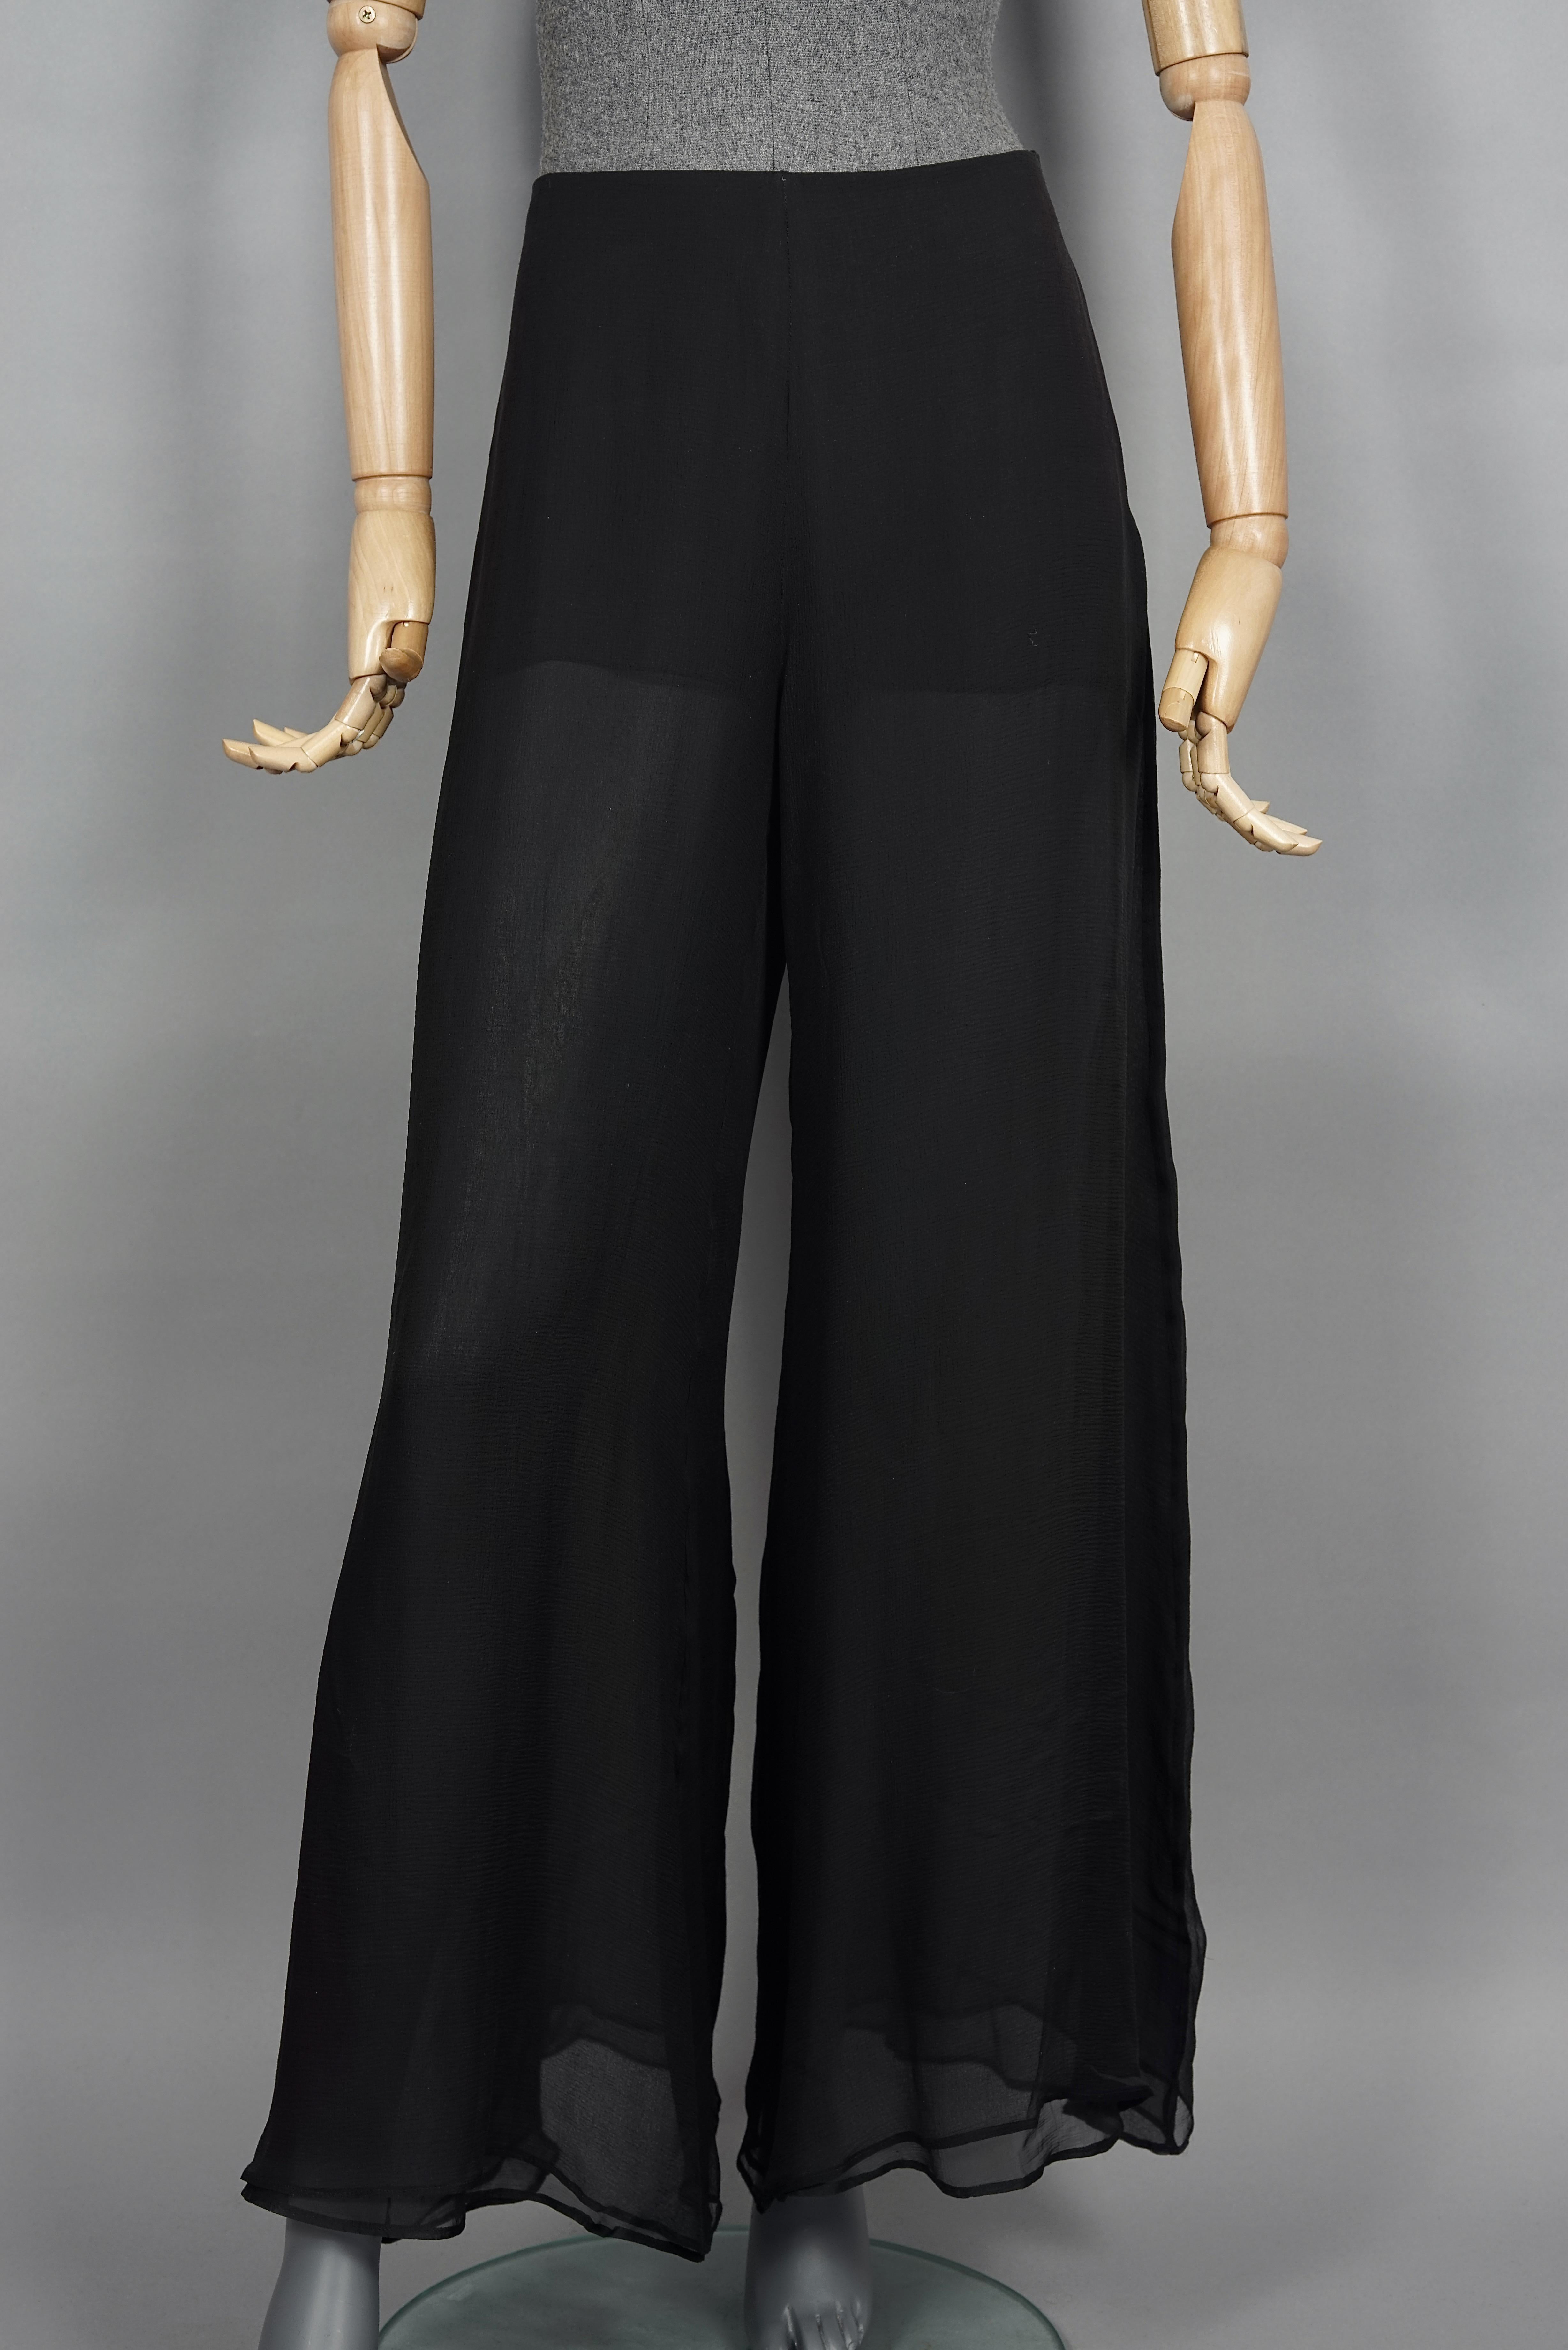 Vintage THIERRY MUGLER COUTURE Silk Sheer Palazzo Pants

Measurements taken laid flat, please double waist and hips:
Waist: 15 inches (38 cm)
Hips: 27.55 inches (70 cm)
Length: 42 inches (107 cm)
Hem Circumference: 19.68 inches (50 cm)

Features:
-